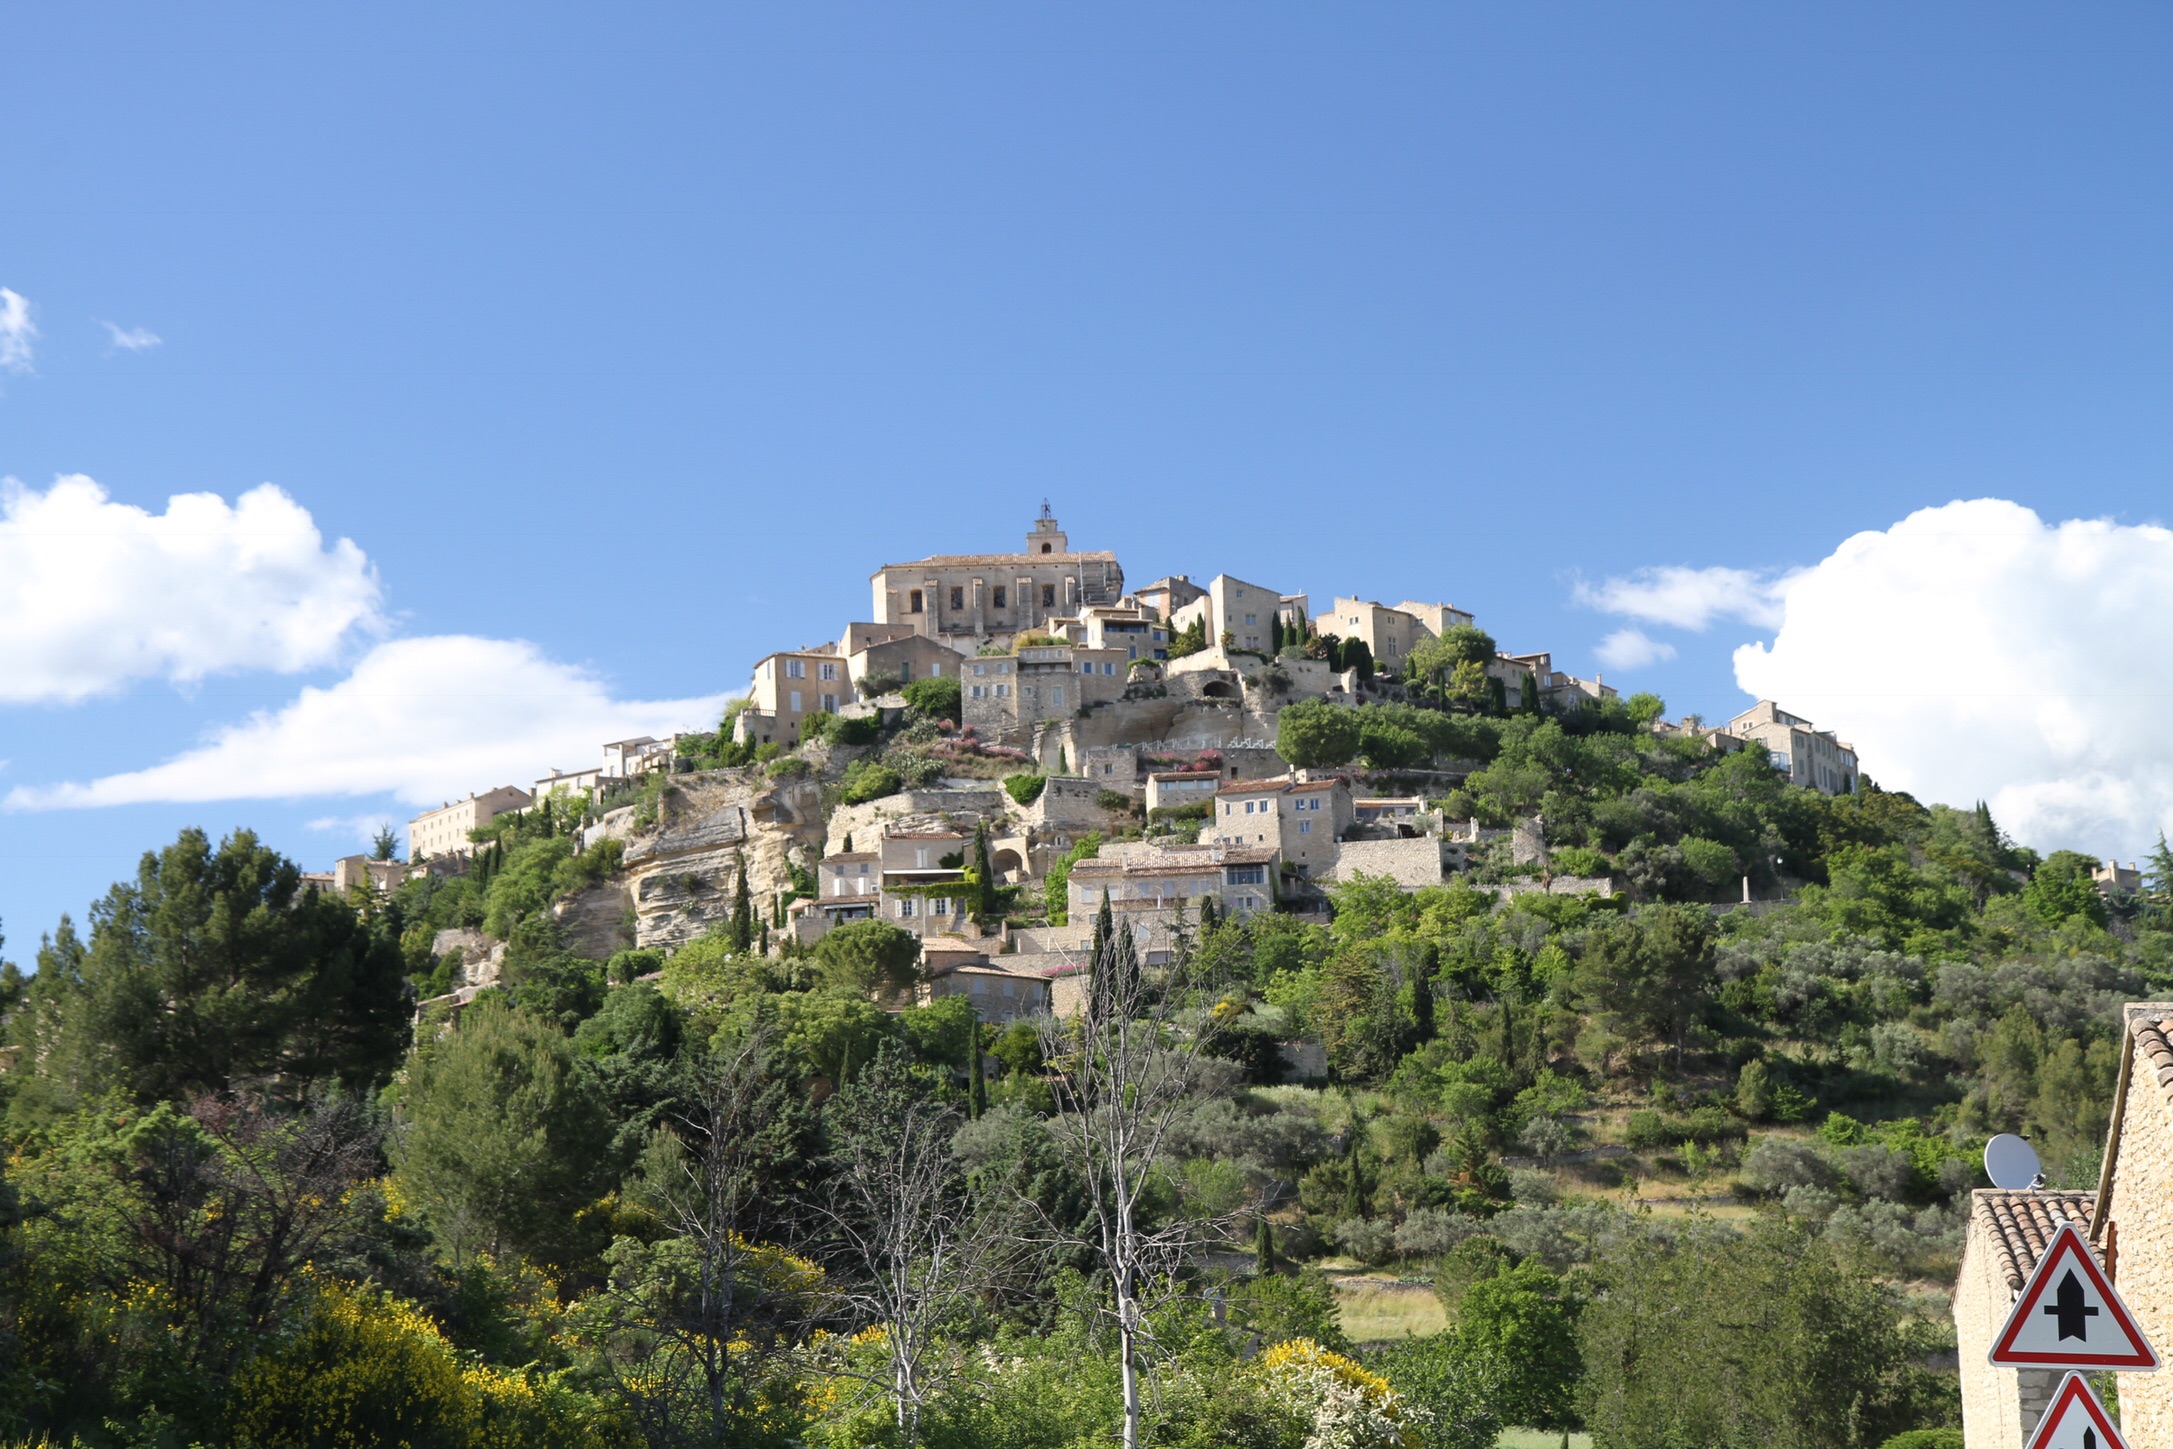 A great look at Gordes up on the hill, as seen from the road when driving back to Gordes from Roussillon